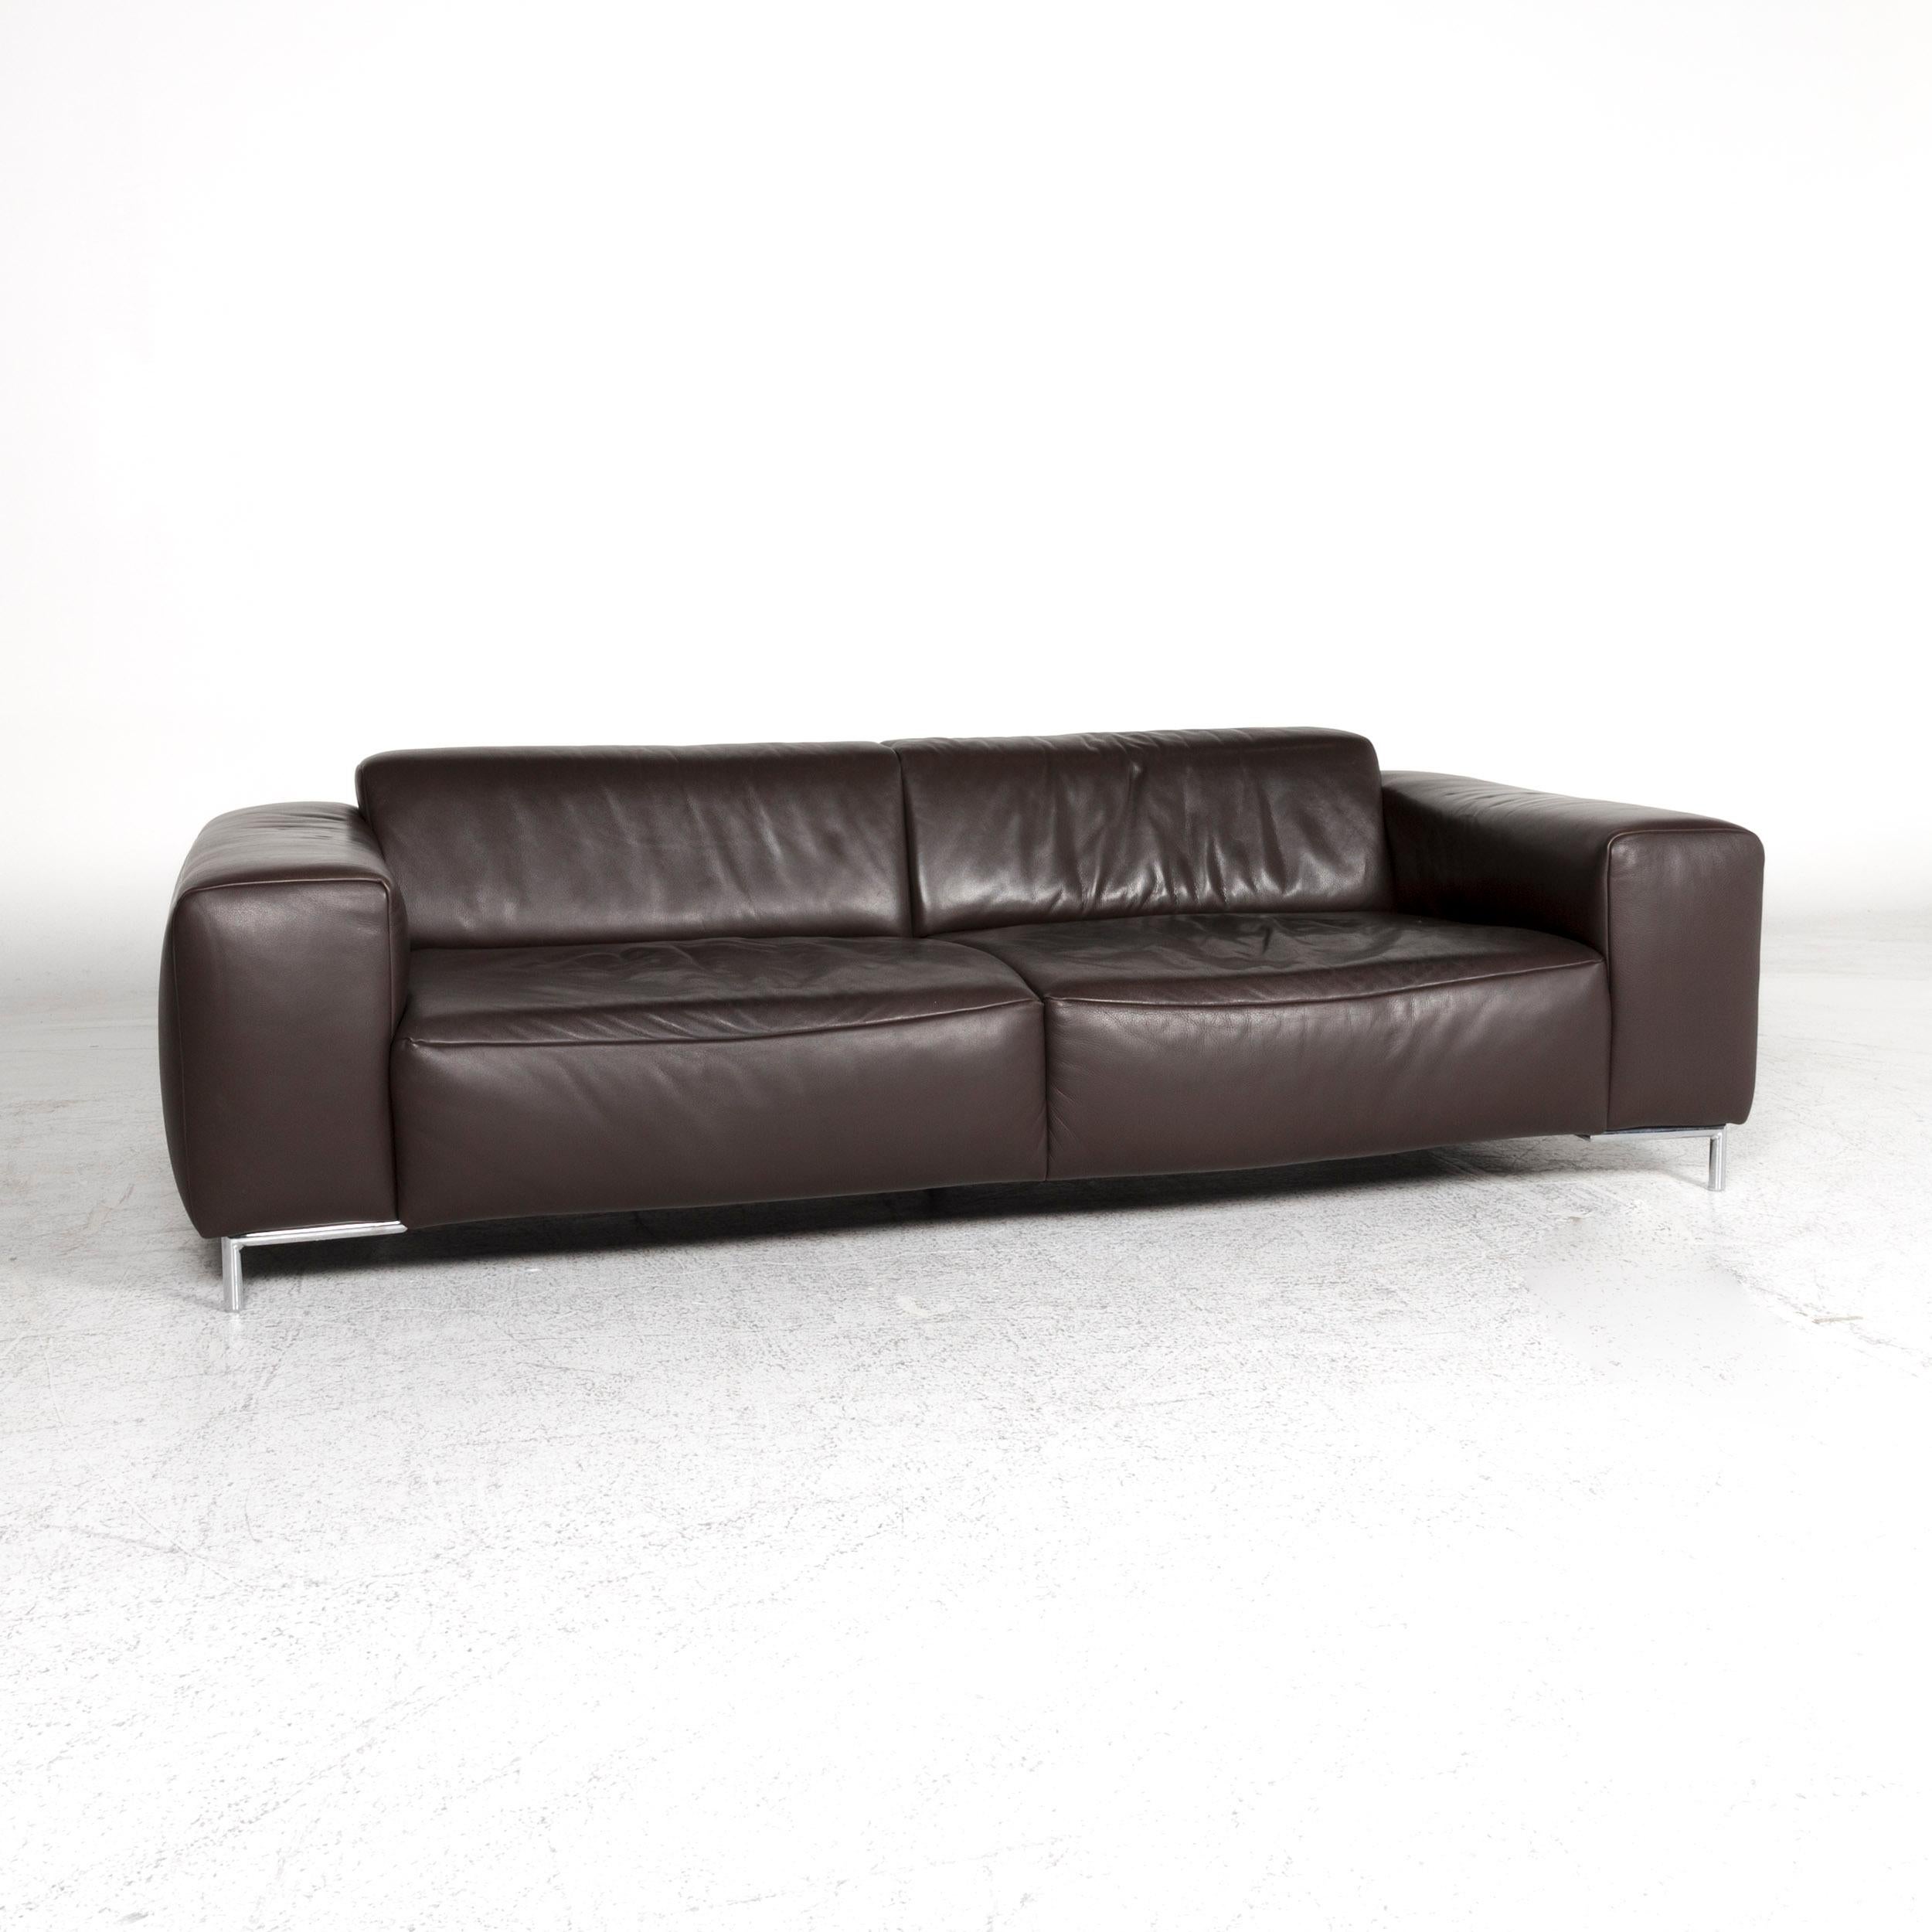 German Koinor Leather Sofa Brown Three-Seat Couch For Sale